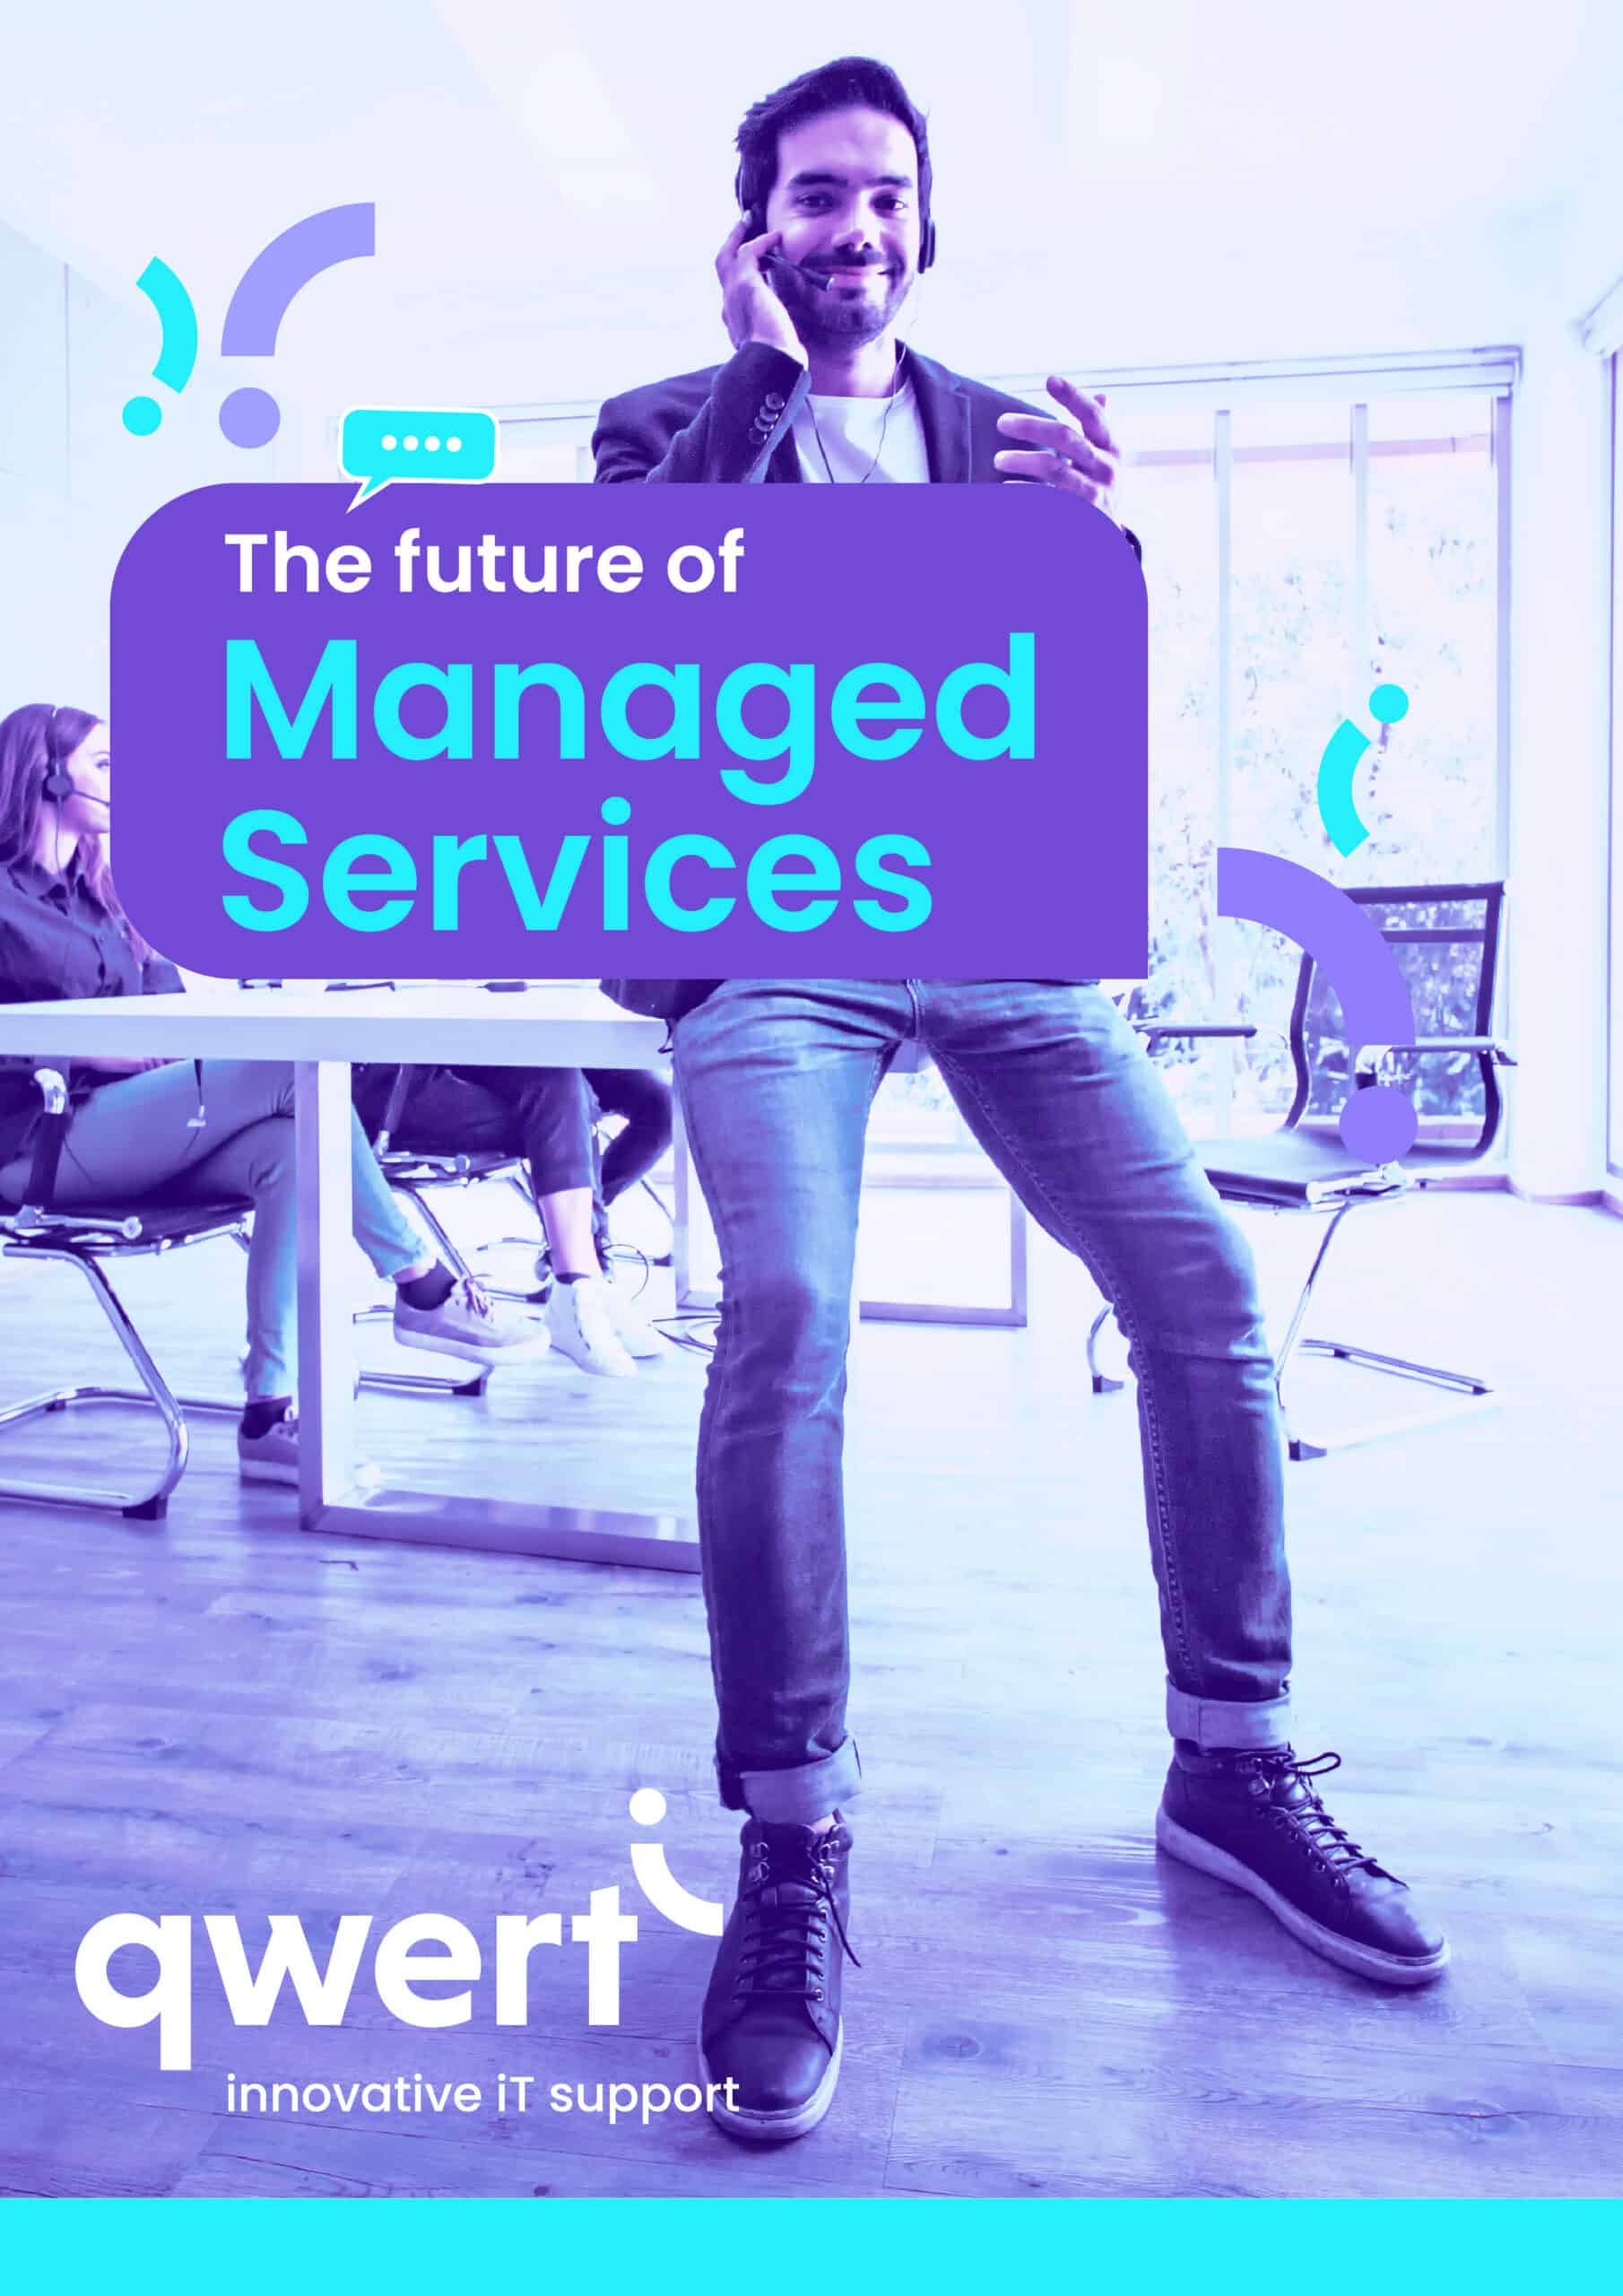 The future of managed services by Qwerti 1